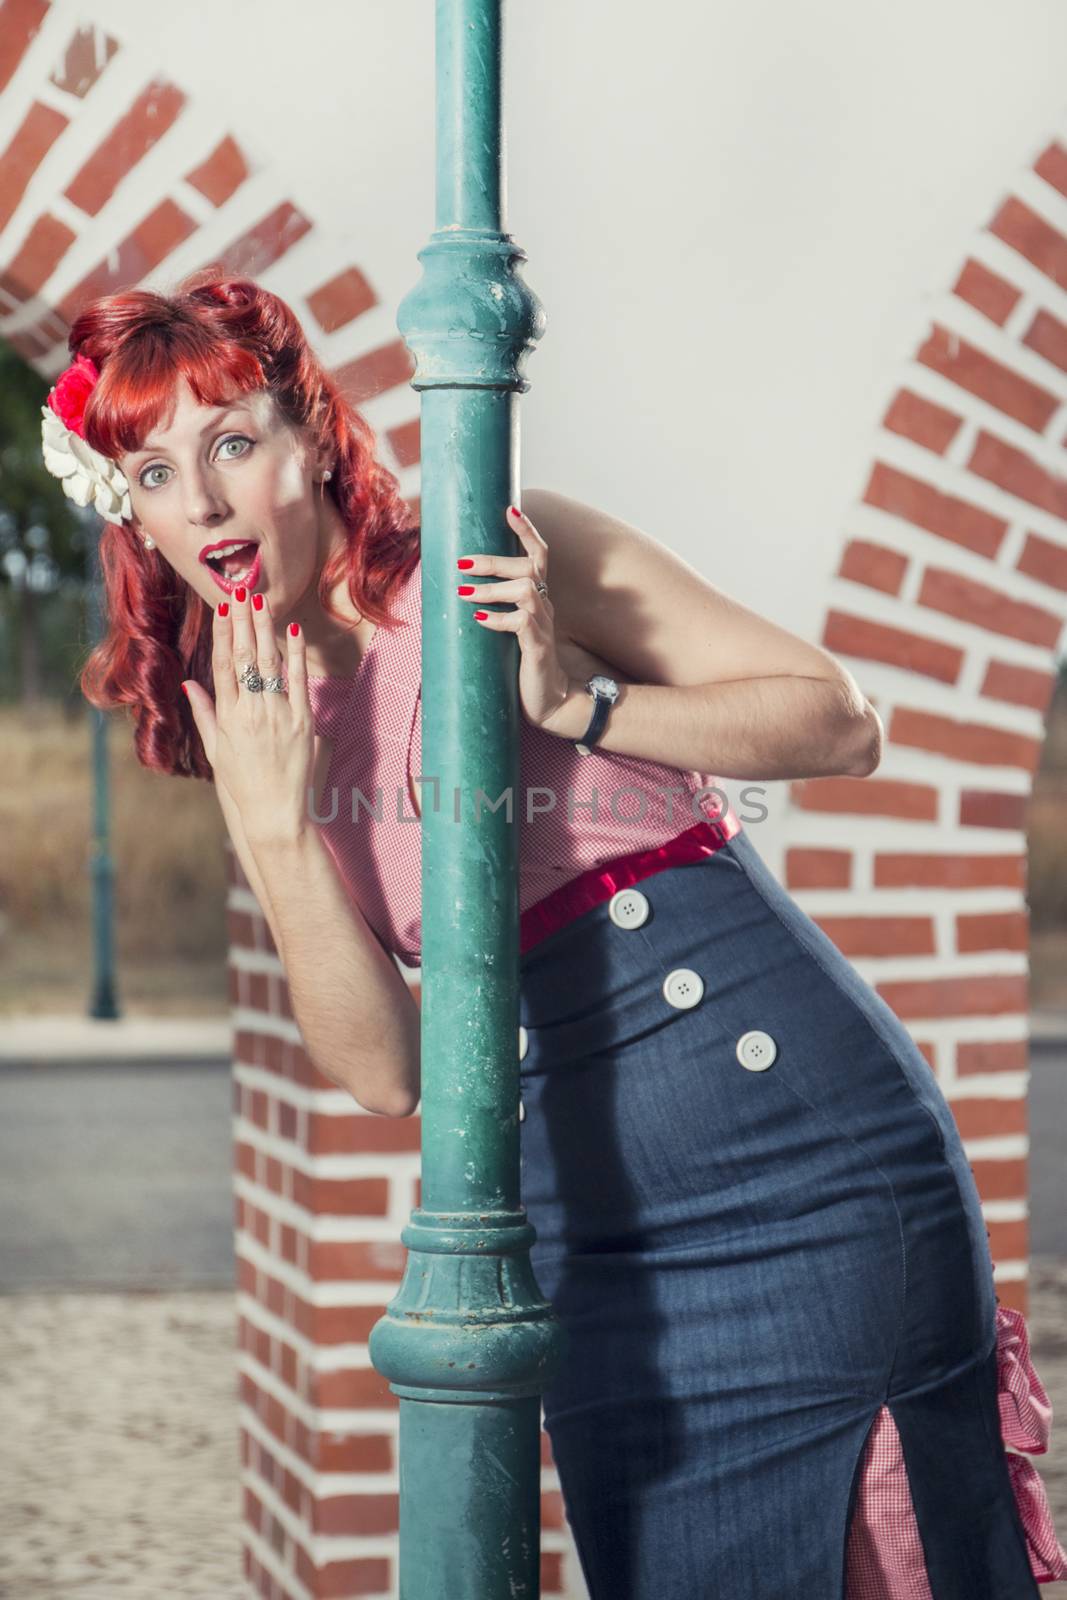 pinup young woman in vintage style clothing by membio